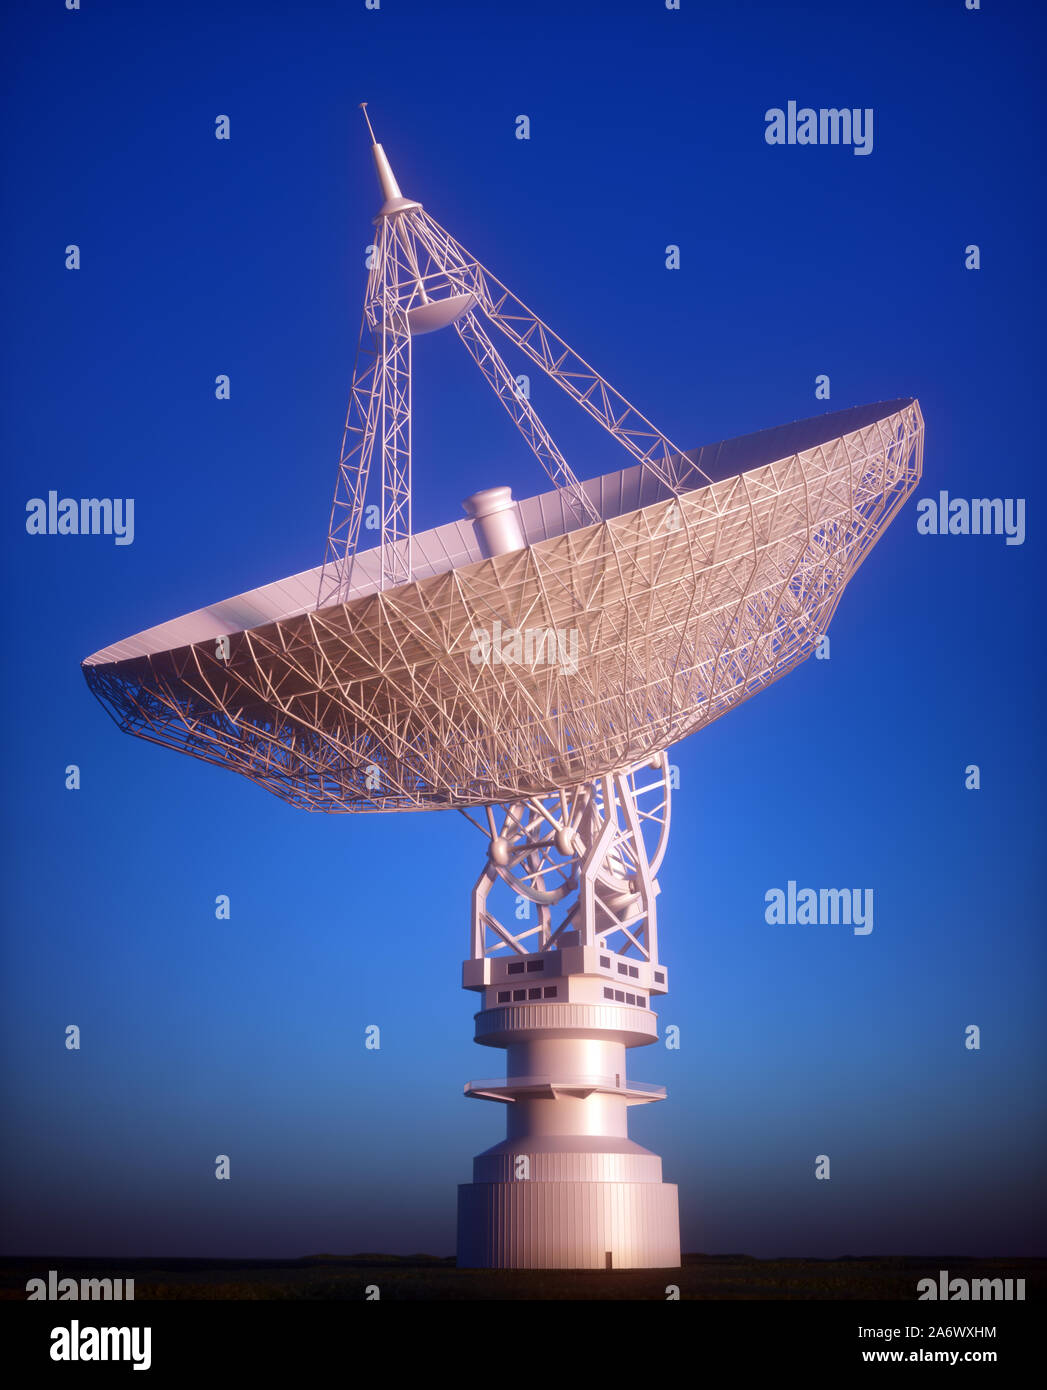 Huge satellite antenna dish for communication and signal reception out of the planet Earth. Observatory searching for radio signal in space at sunset. Stock Photo